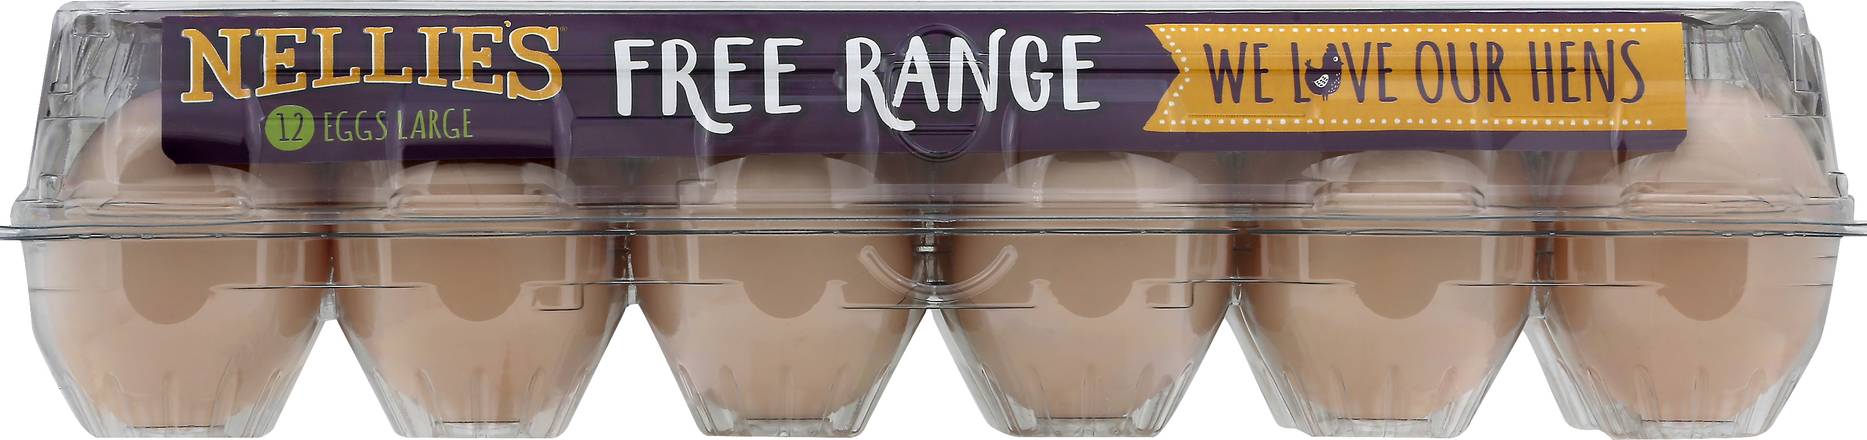 Nellie's Grade a Large Brown Free Range Eggs (12 ct)